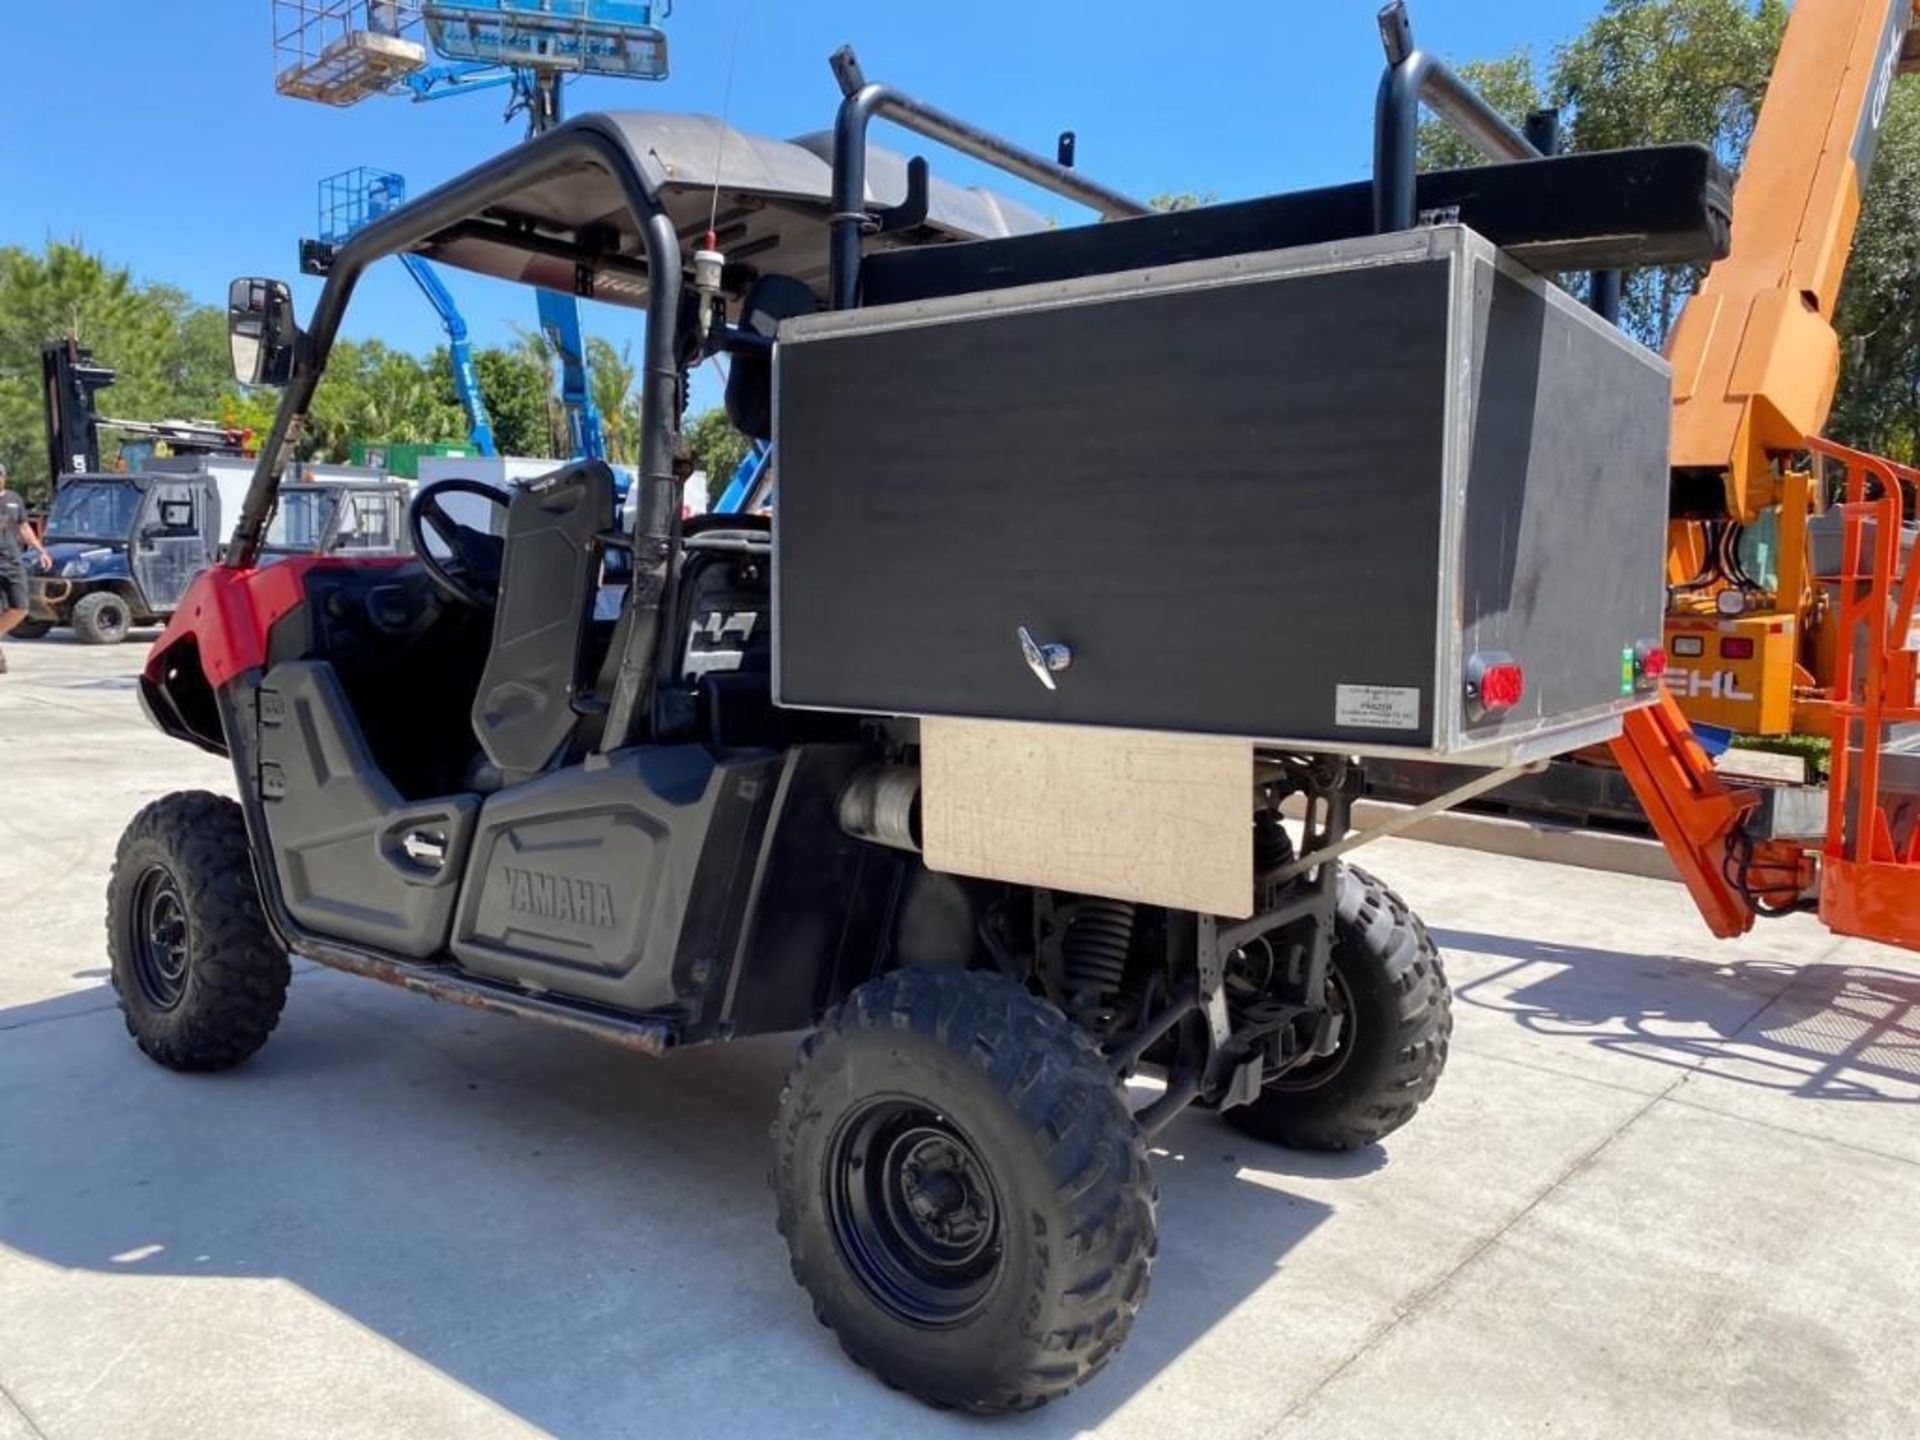 YAMAHA UTV WITH TOOL/STORAGE BIN, HAS RUST ON UNDER CARRIAGE AND FRAME, RUNS AND OPERATES - Image 12 of 20